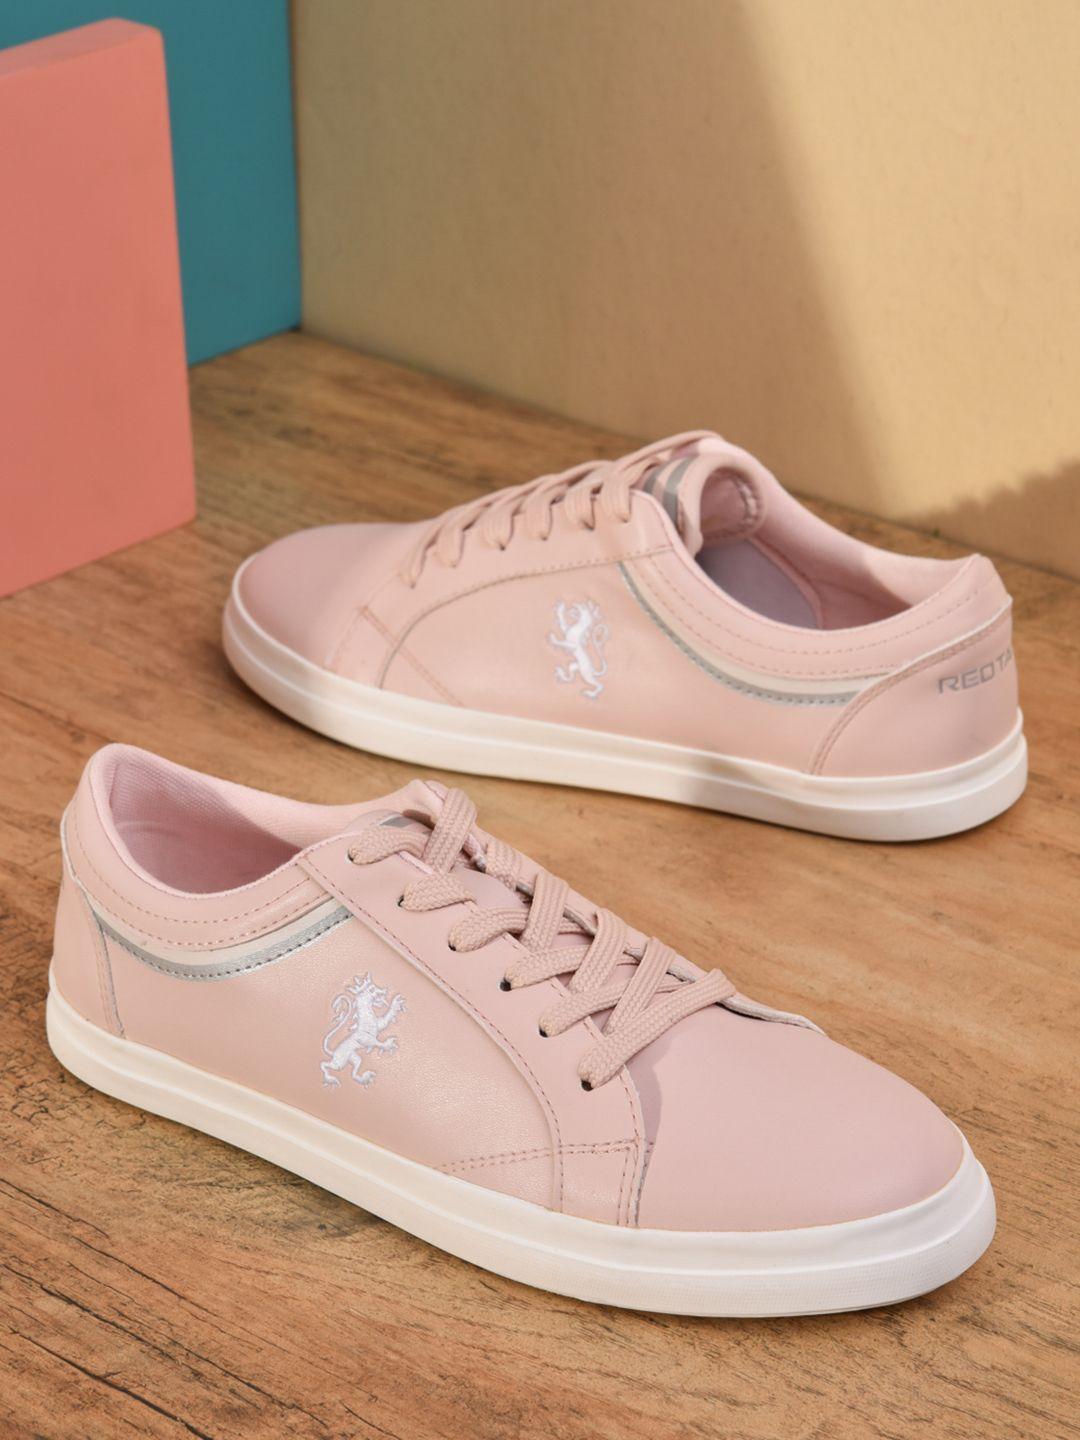 red tape women pink sneakers